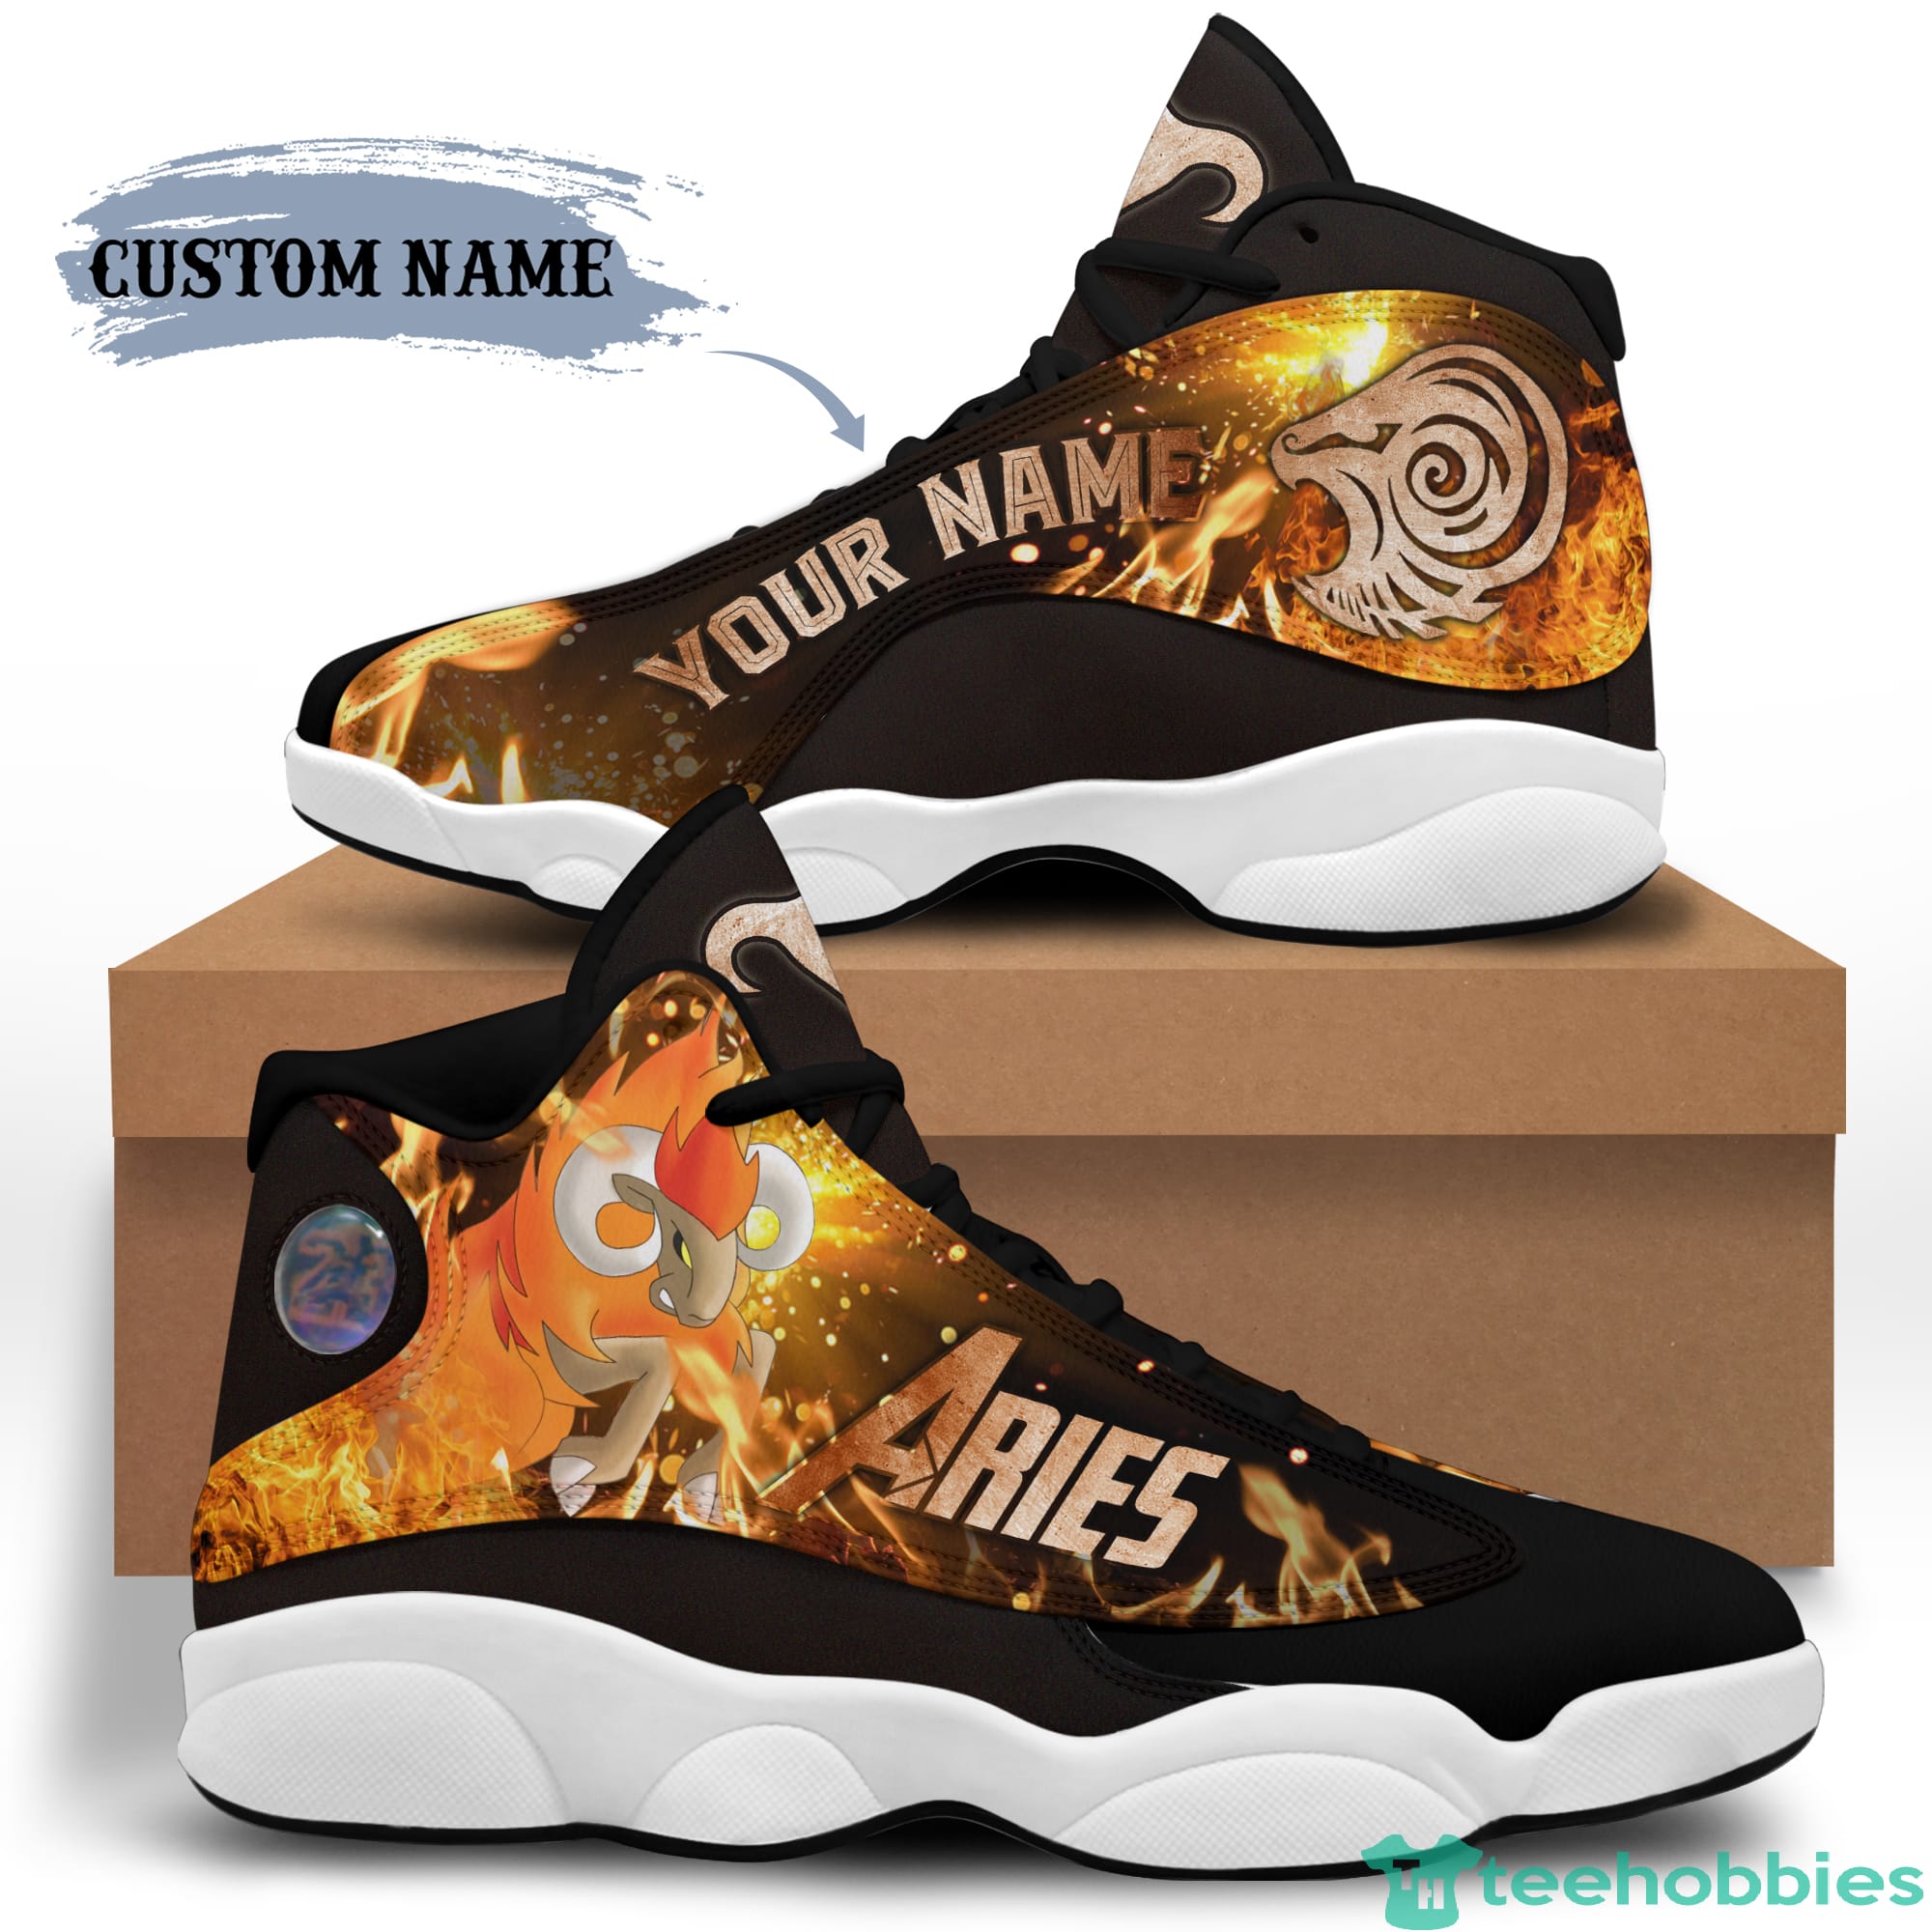 Aries Birthday Gift Personalized Name Personalized Name Air Jordan 13 Shoes SKU-277